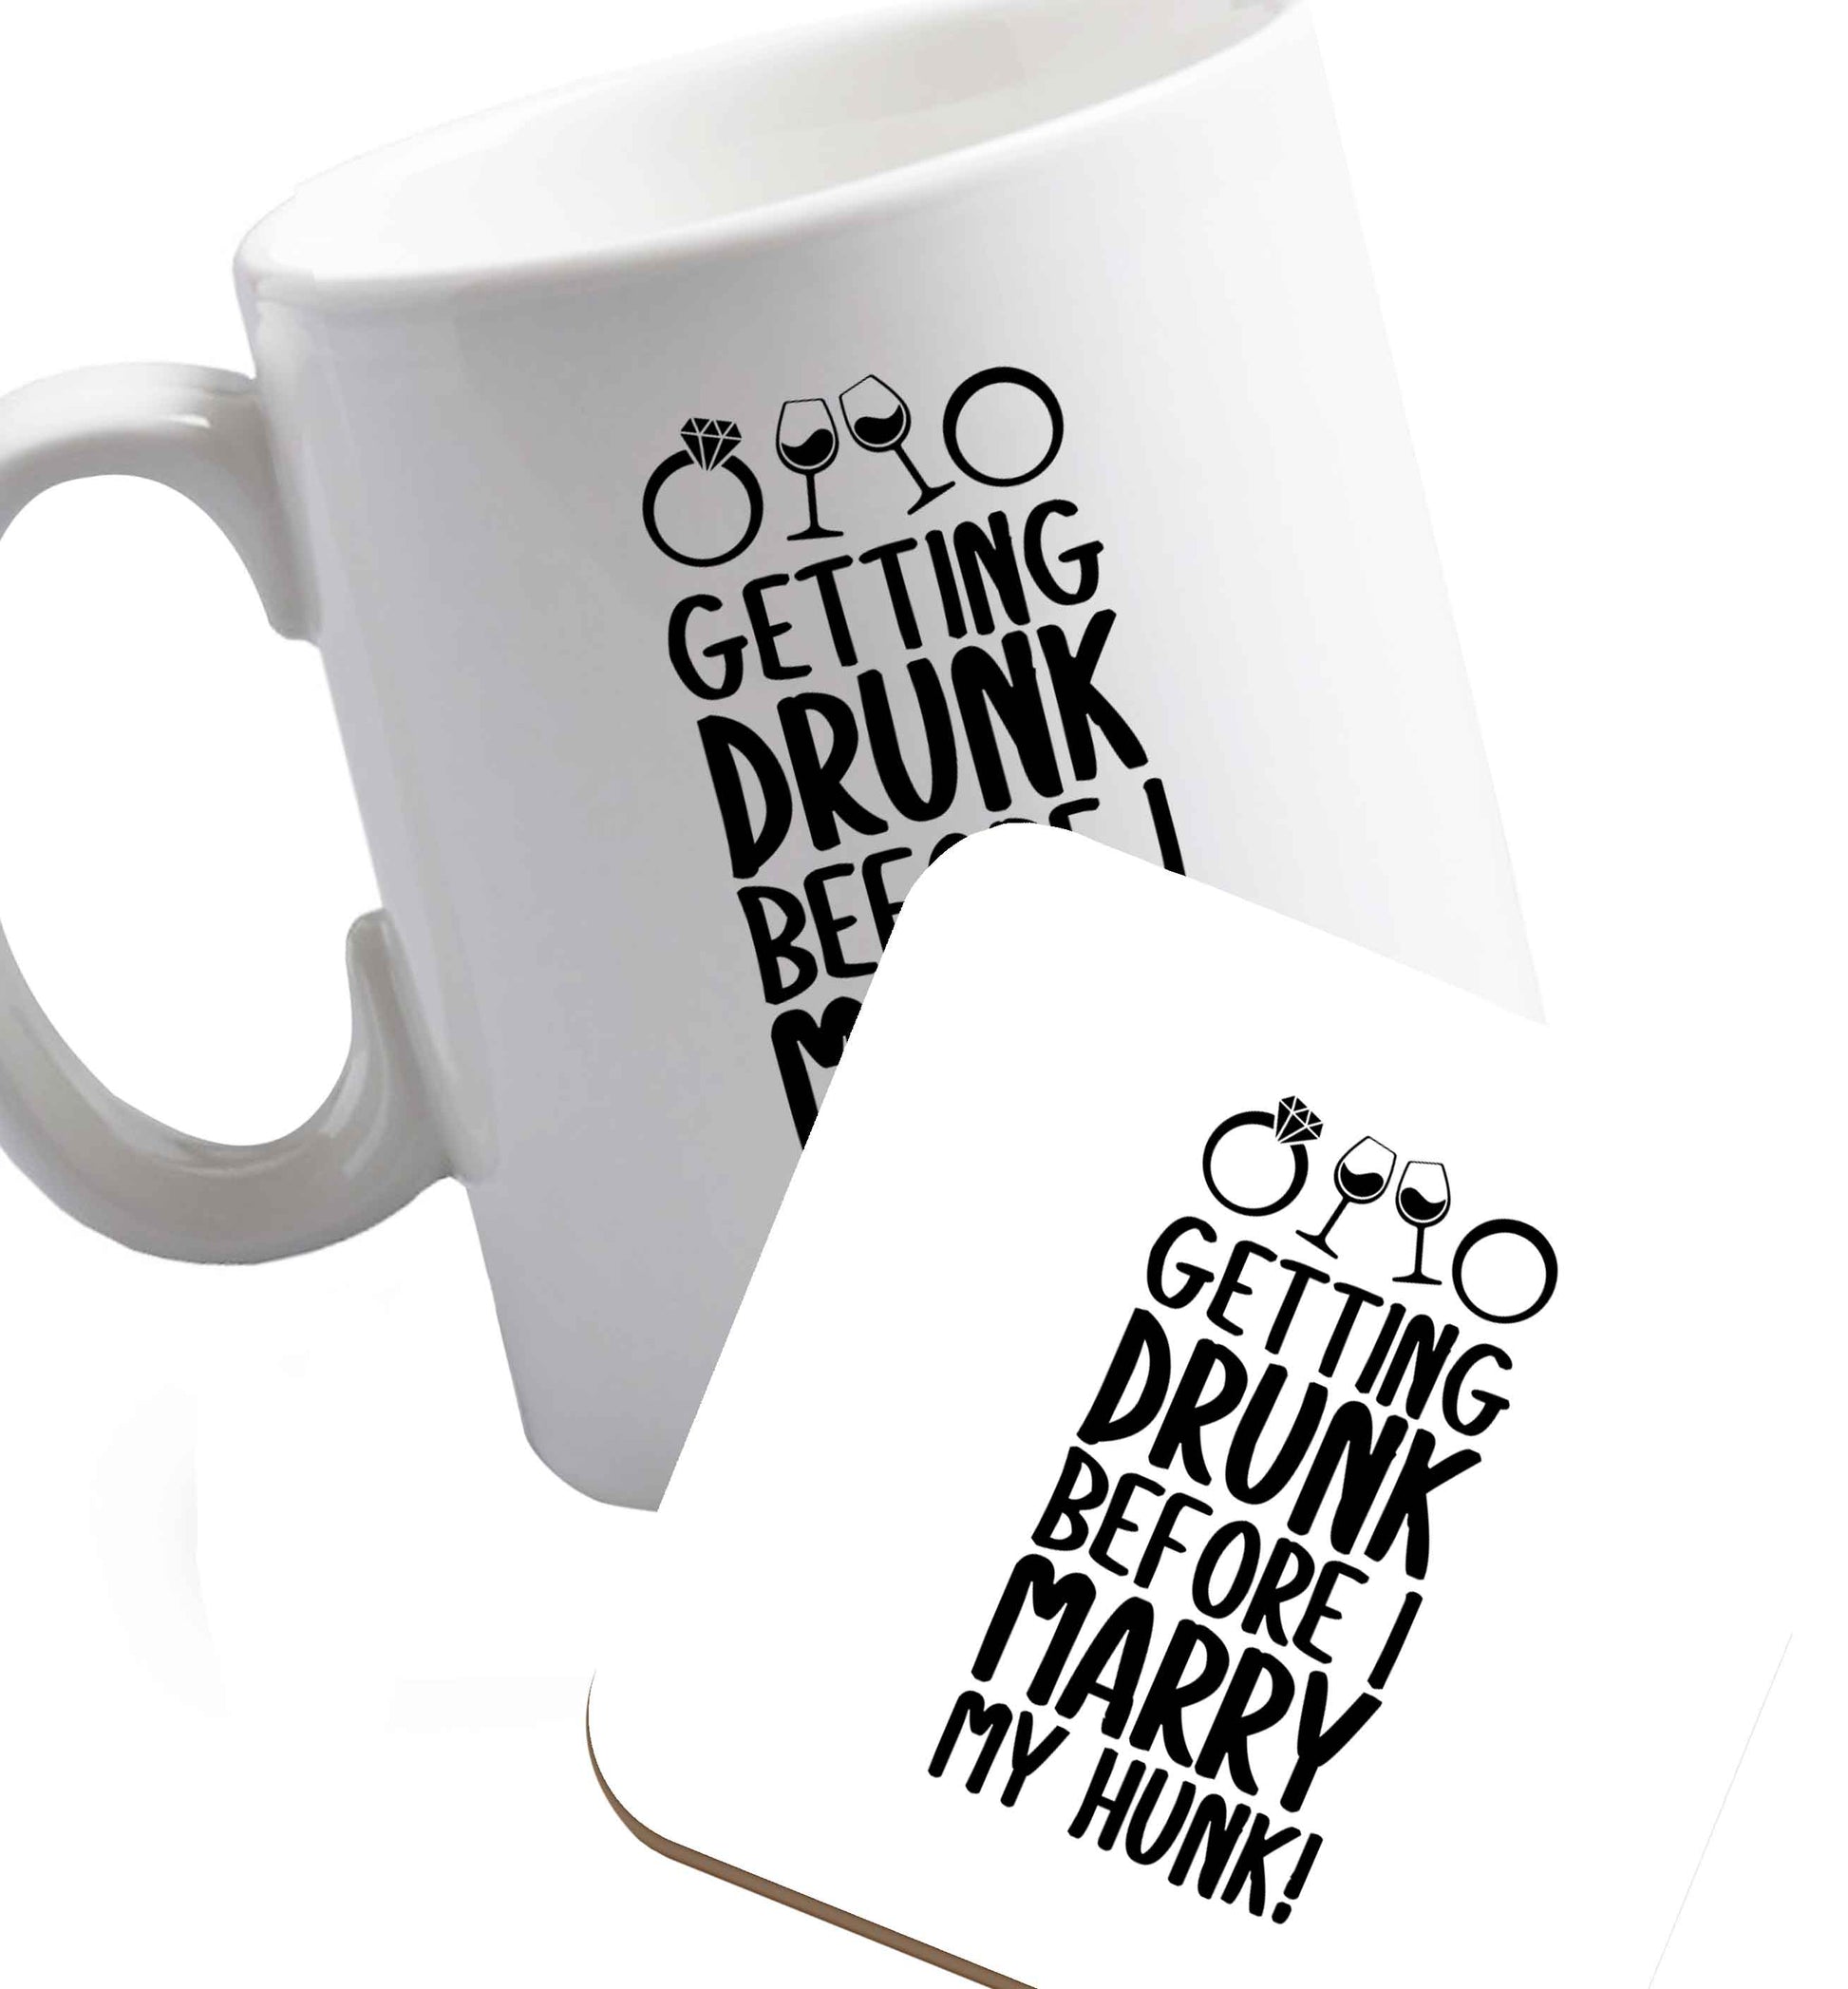 10 oz Getting drunk before I marry my hunk   ceramic mug and coaster set right handed